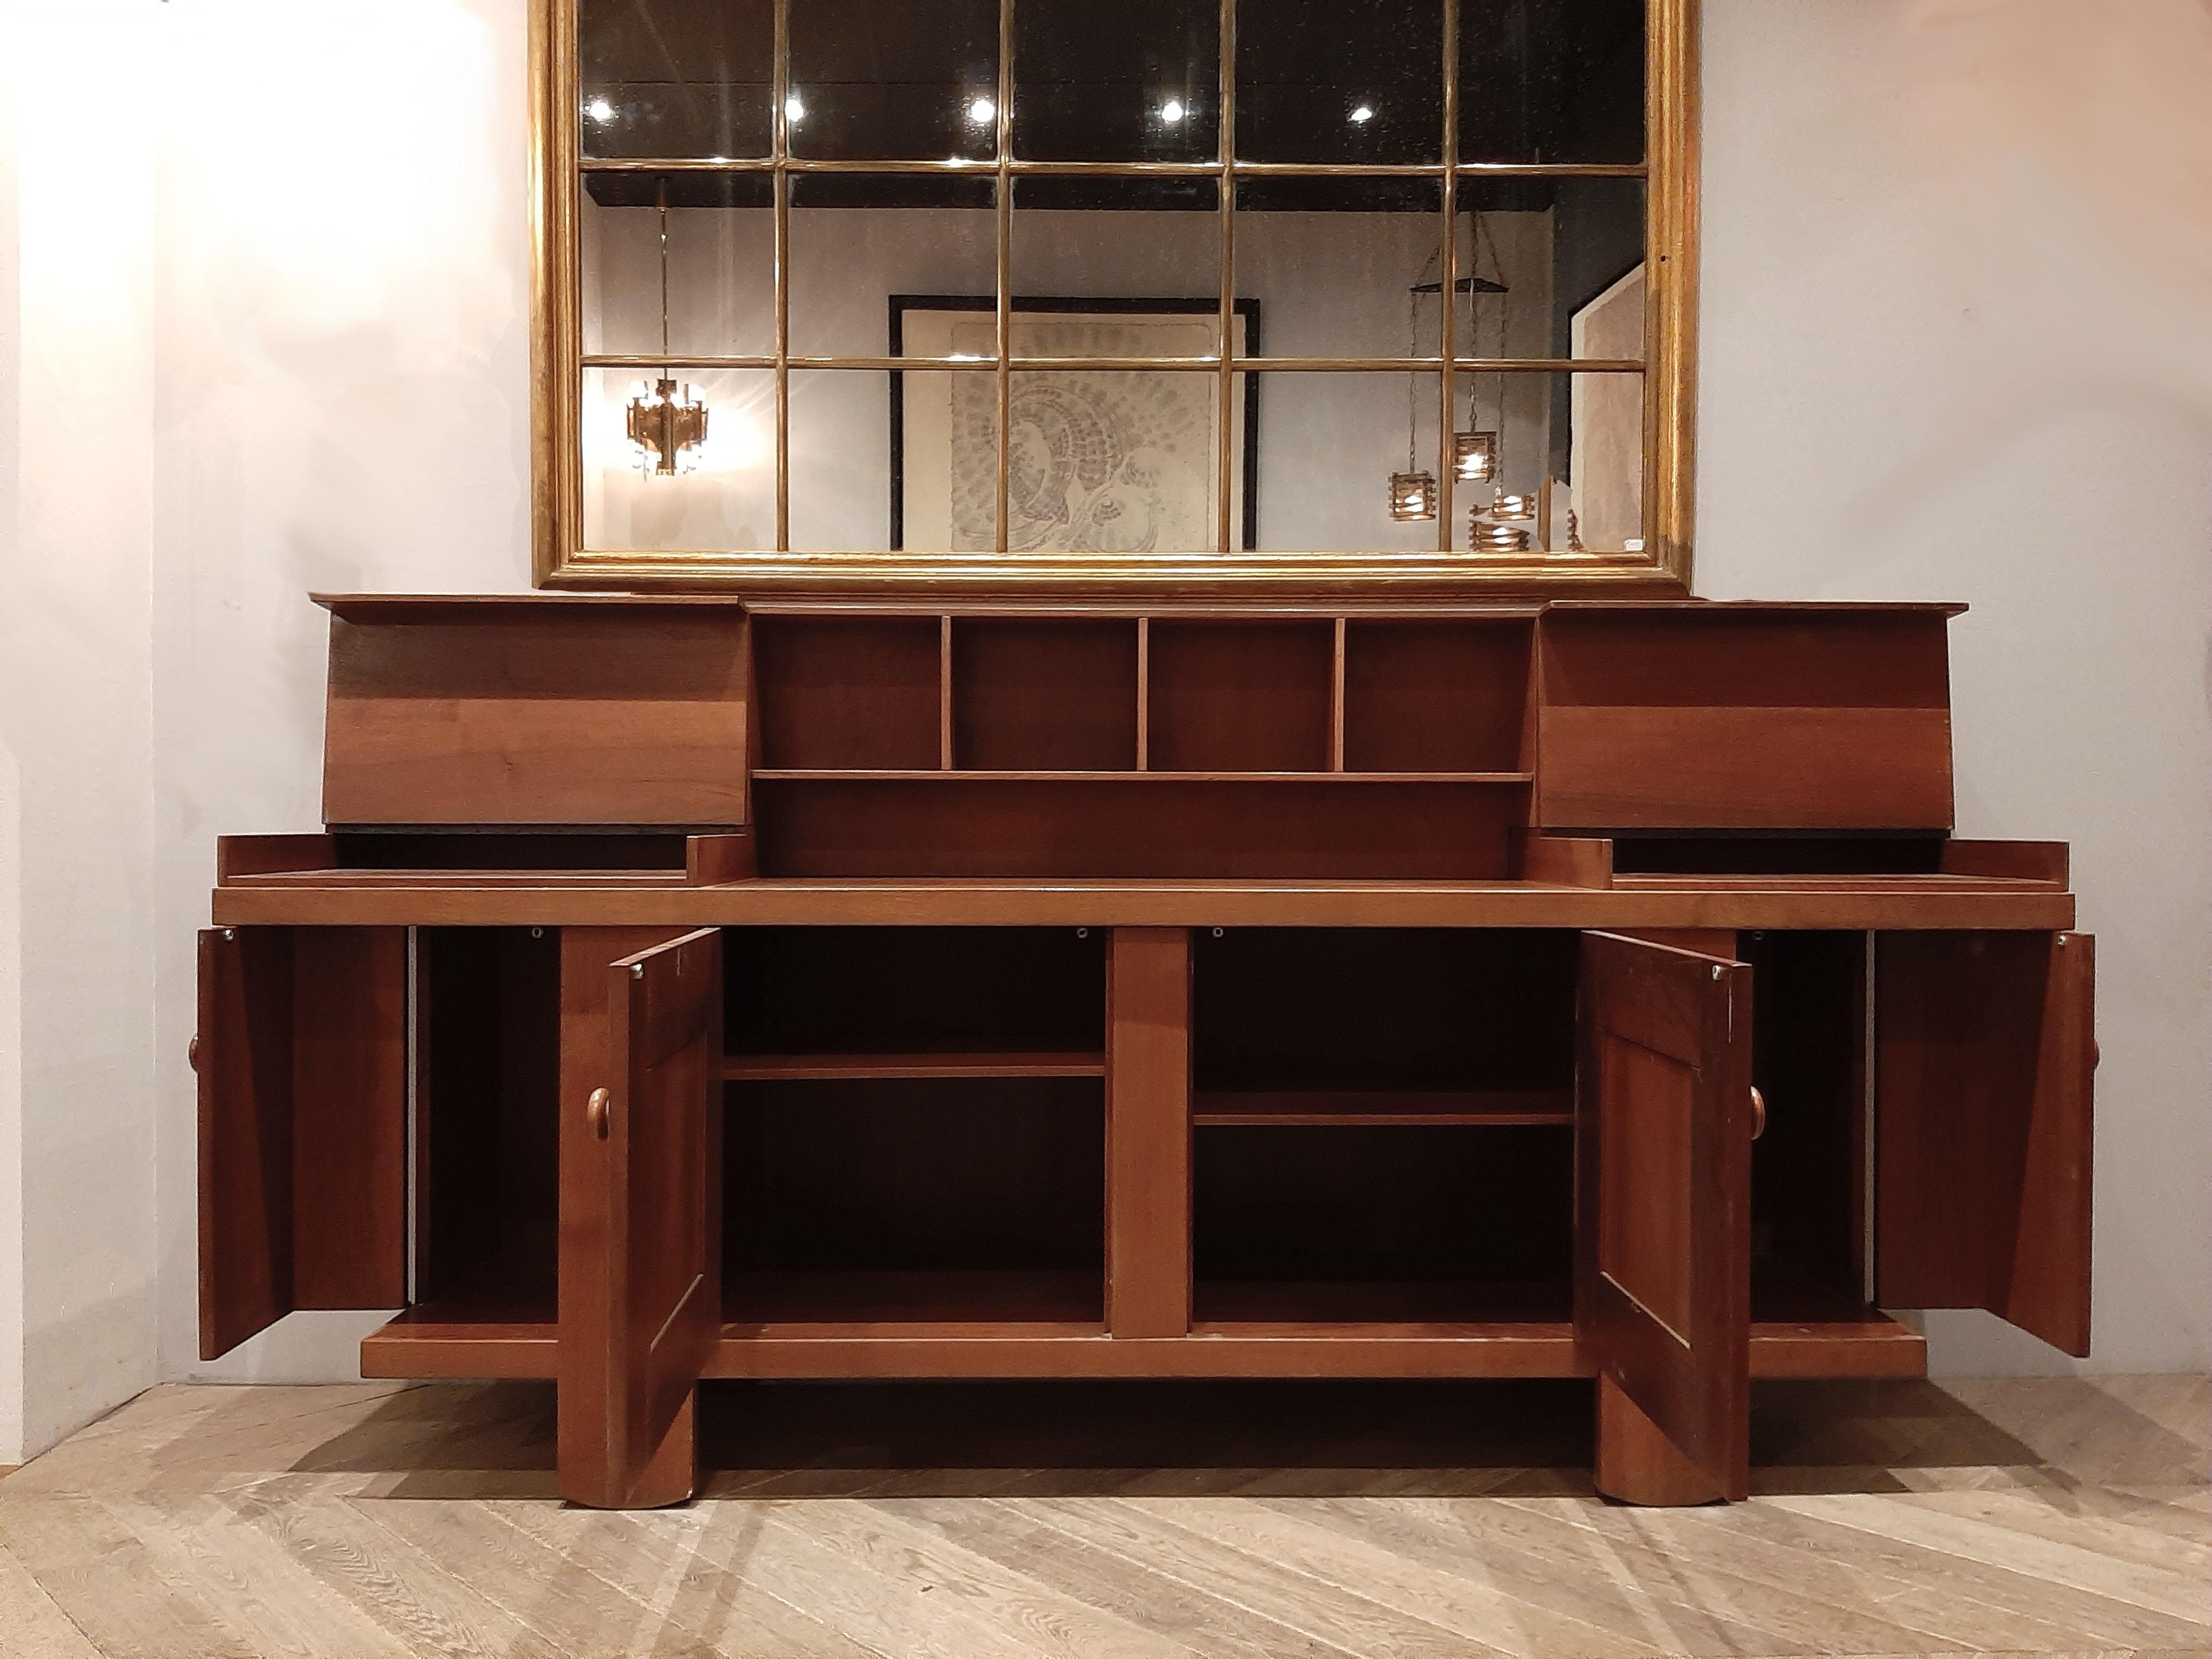 A midcentury Italian buffet cabinet designed by Silvio Coppola for Bernini. This walnut cabinet features two end doors revealing adjustable shelves on each side and storage, two center doors each revealing and adjustable shelf and a detachable top